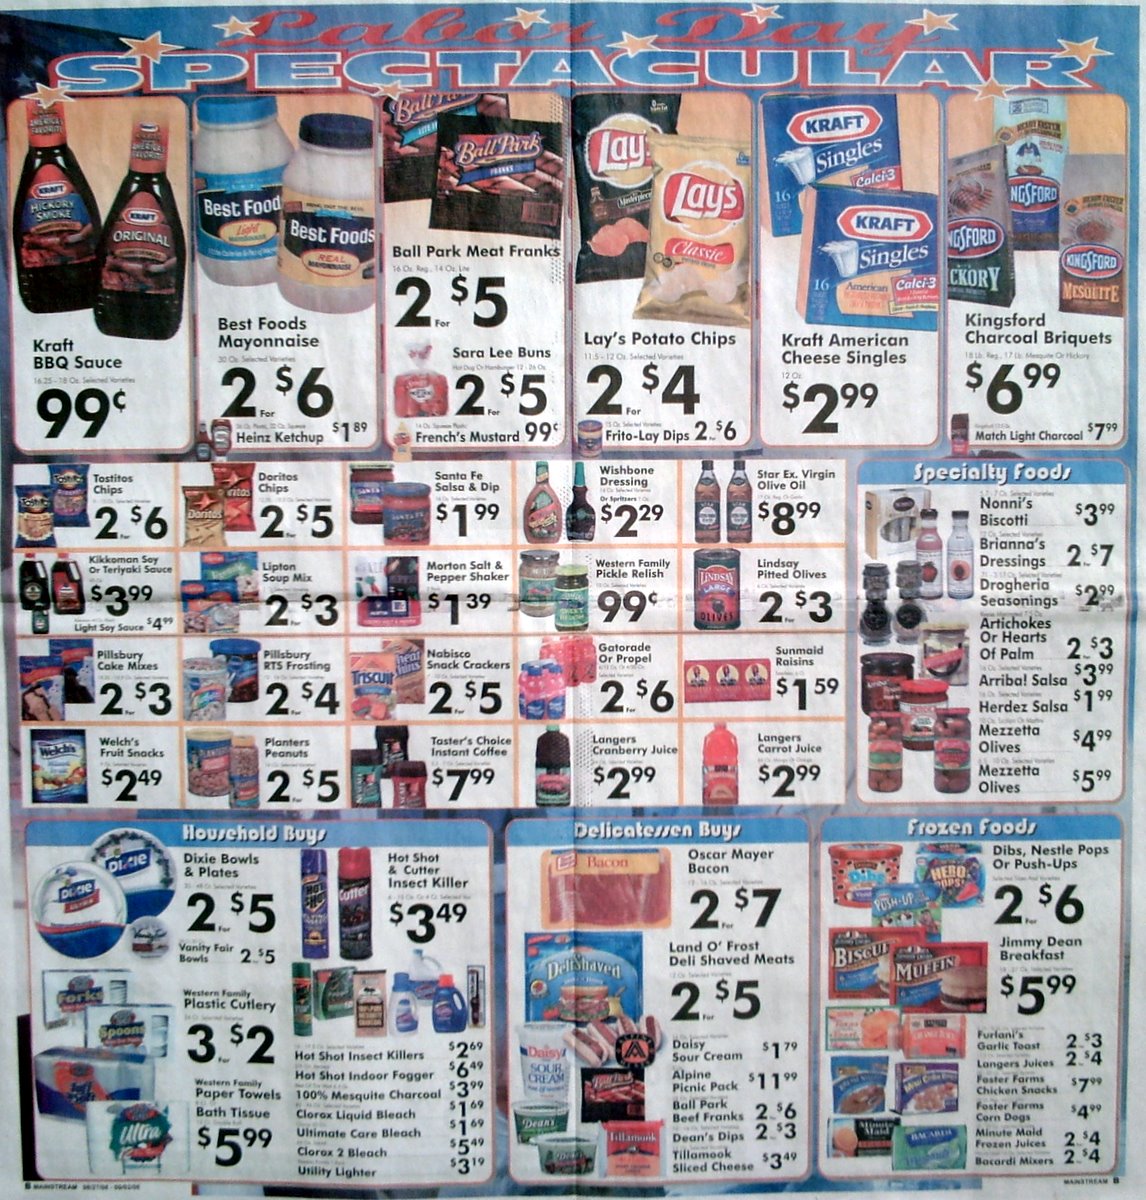 Big Trees Market Weekly Ad for August 27-September 2, 2008